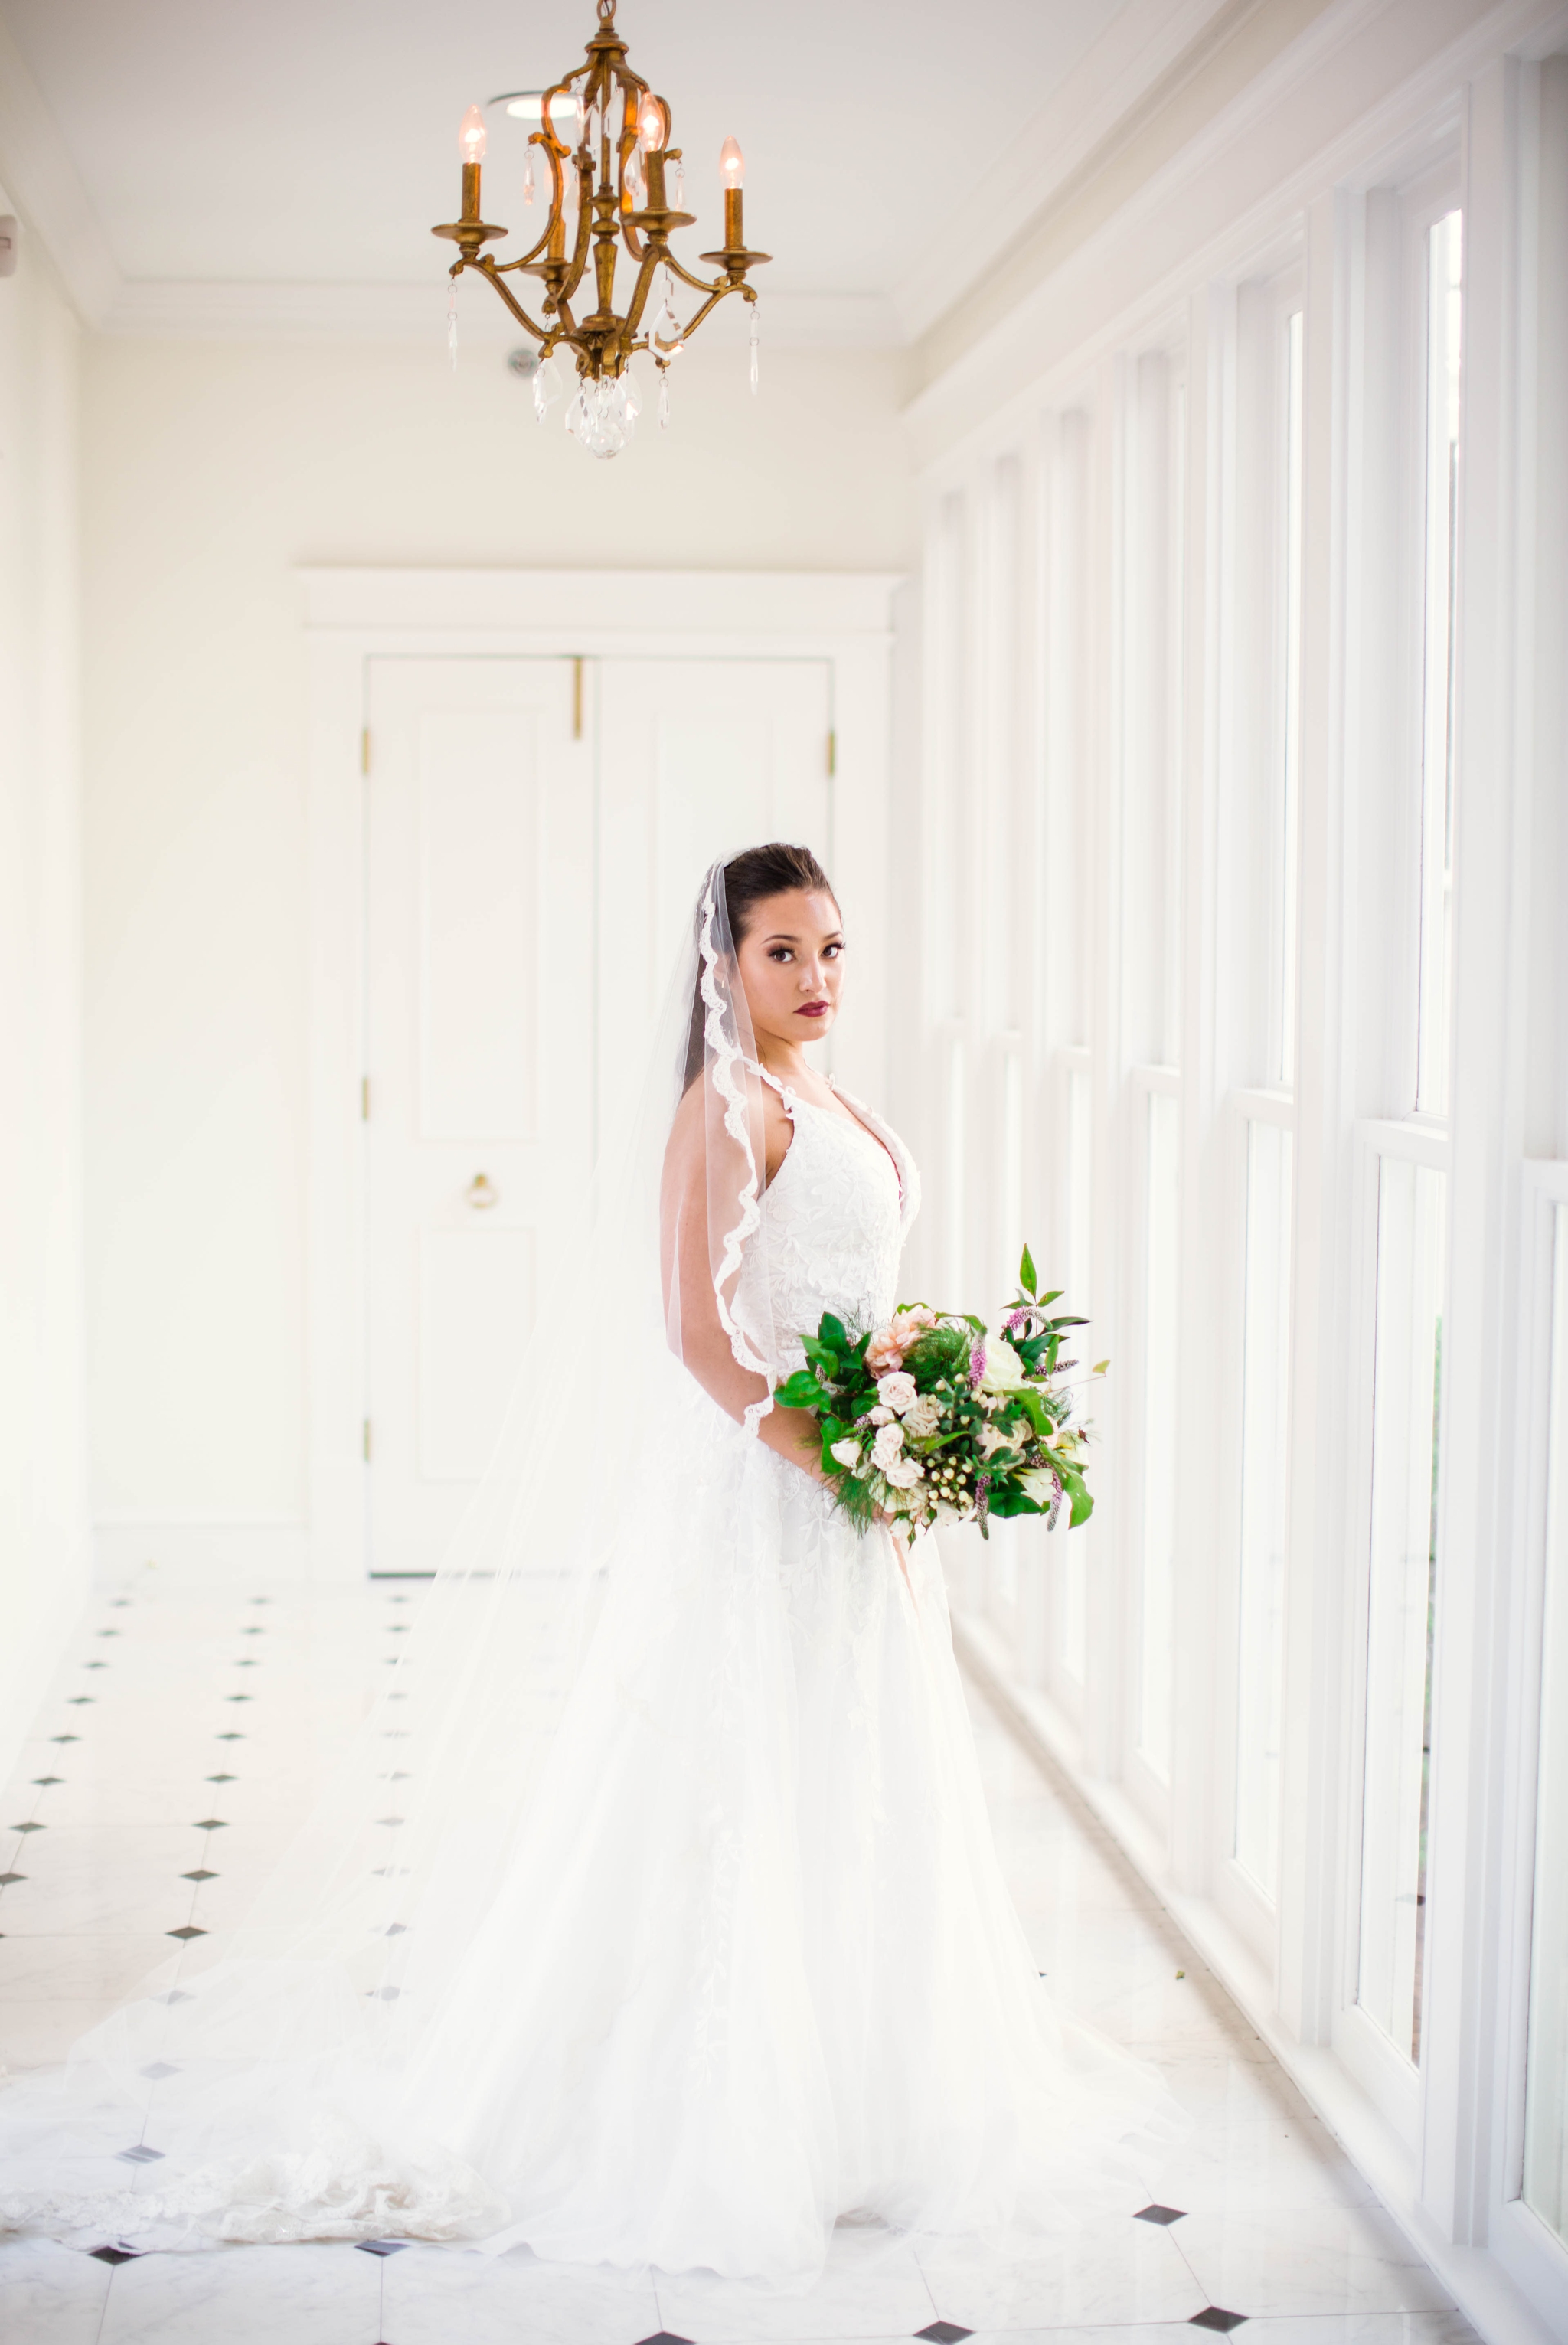  Natural light Bridal Portraits in an all white luxury estate venue with black and white floors and a golden chandelier - Bride is wearing a Wedding Dress by Sherri Hill - shot with available window light - Fine Art Wedding Photographer in Honolulu O